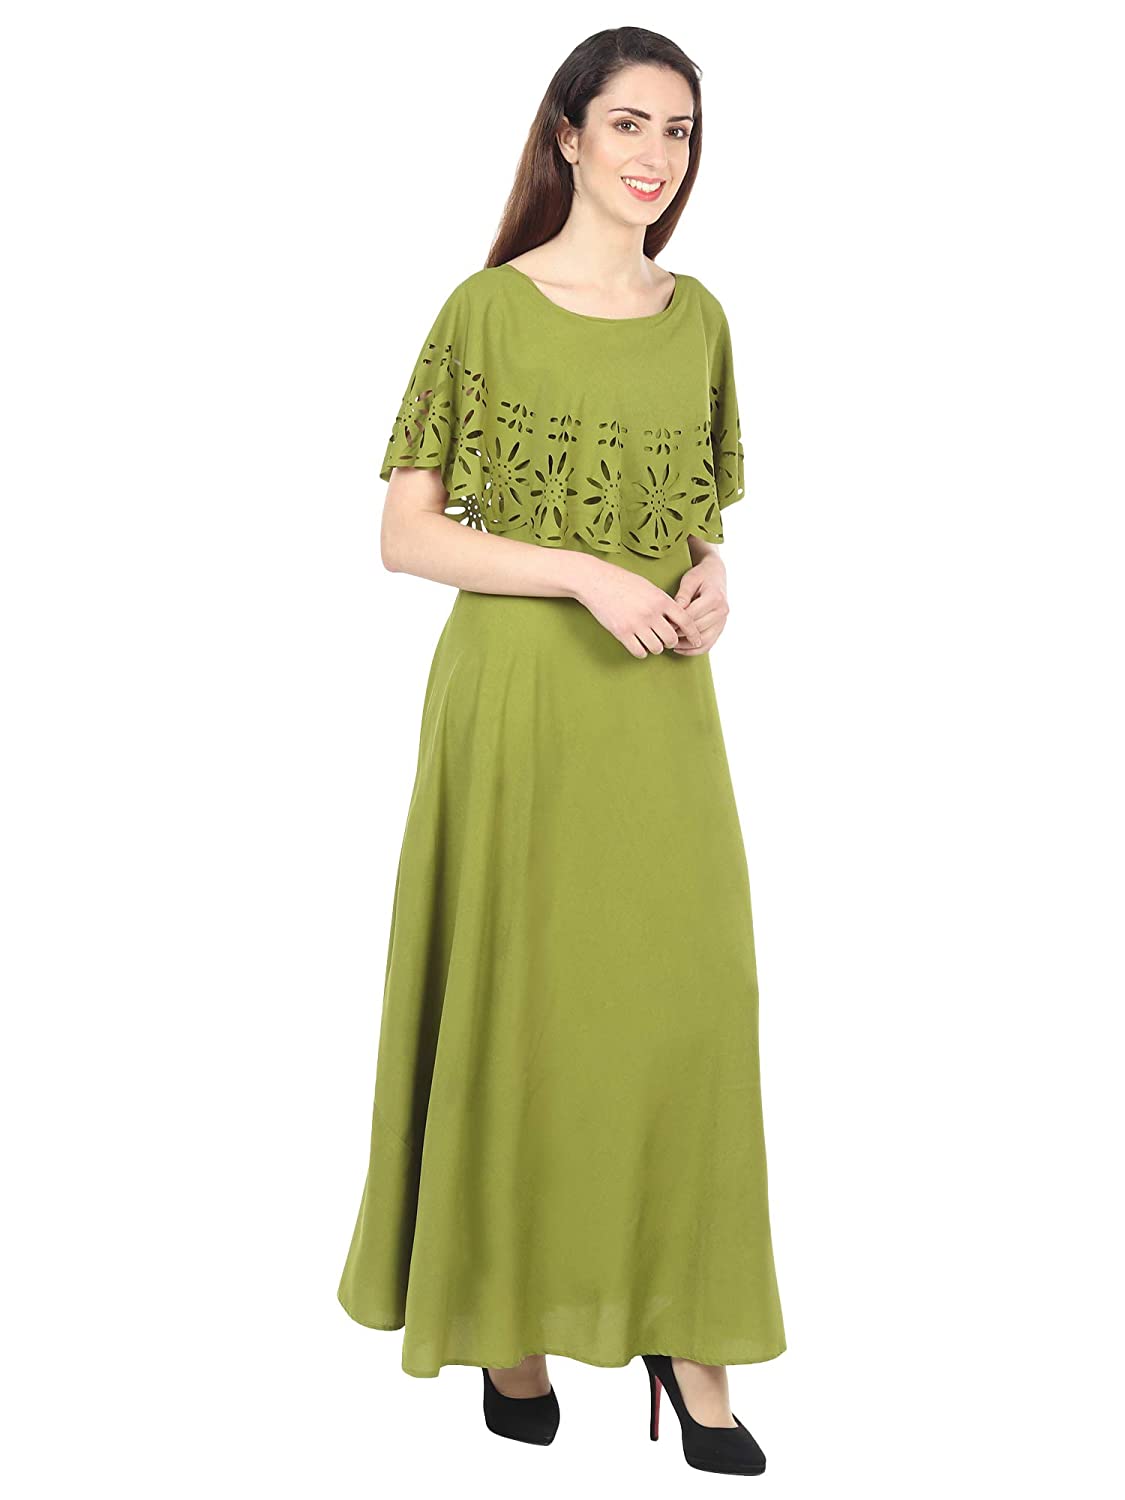 IQRA FASHION Women's Fit And Flare Maxi Dress -  Dresses in Sri Lanka from Arcade Online Shopping - Just Rs. 4899!